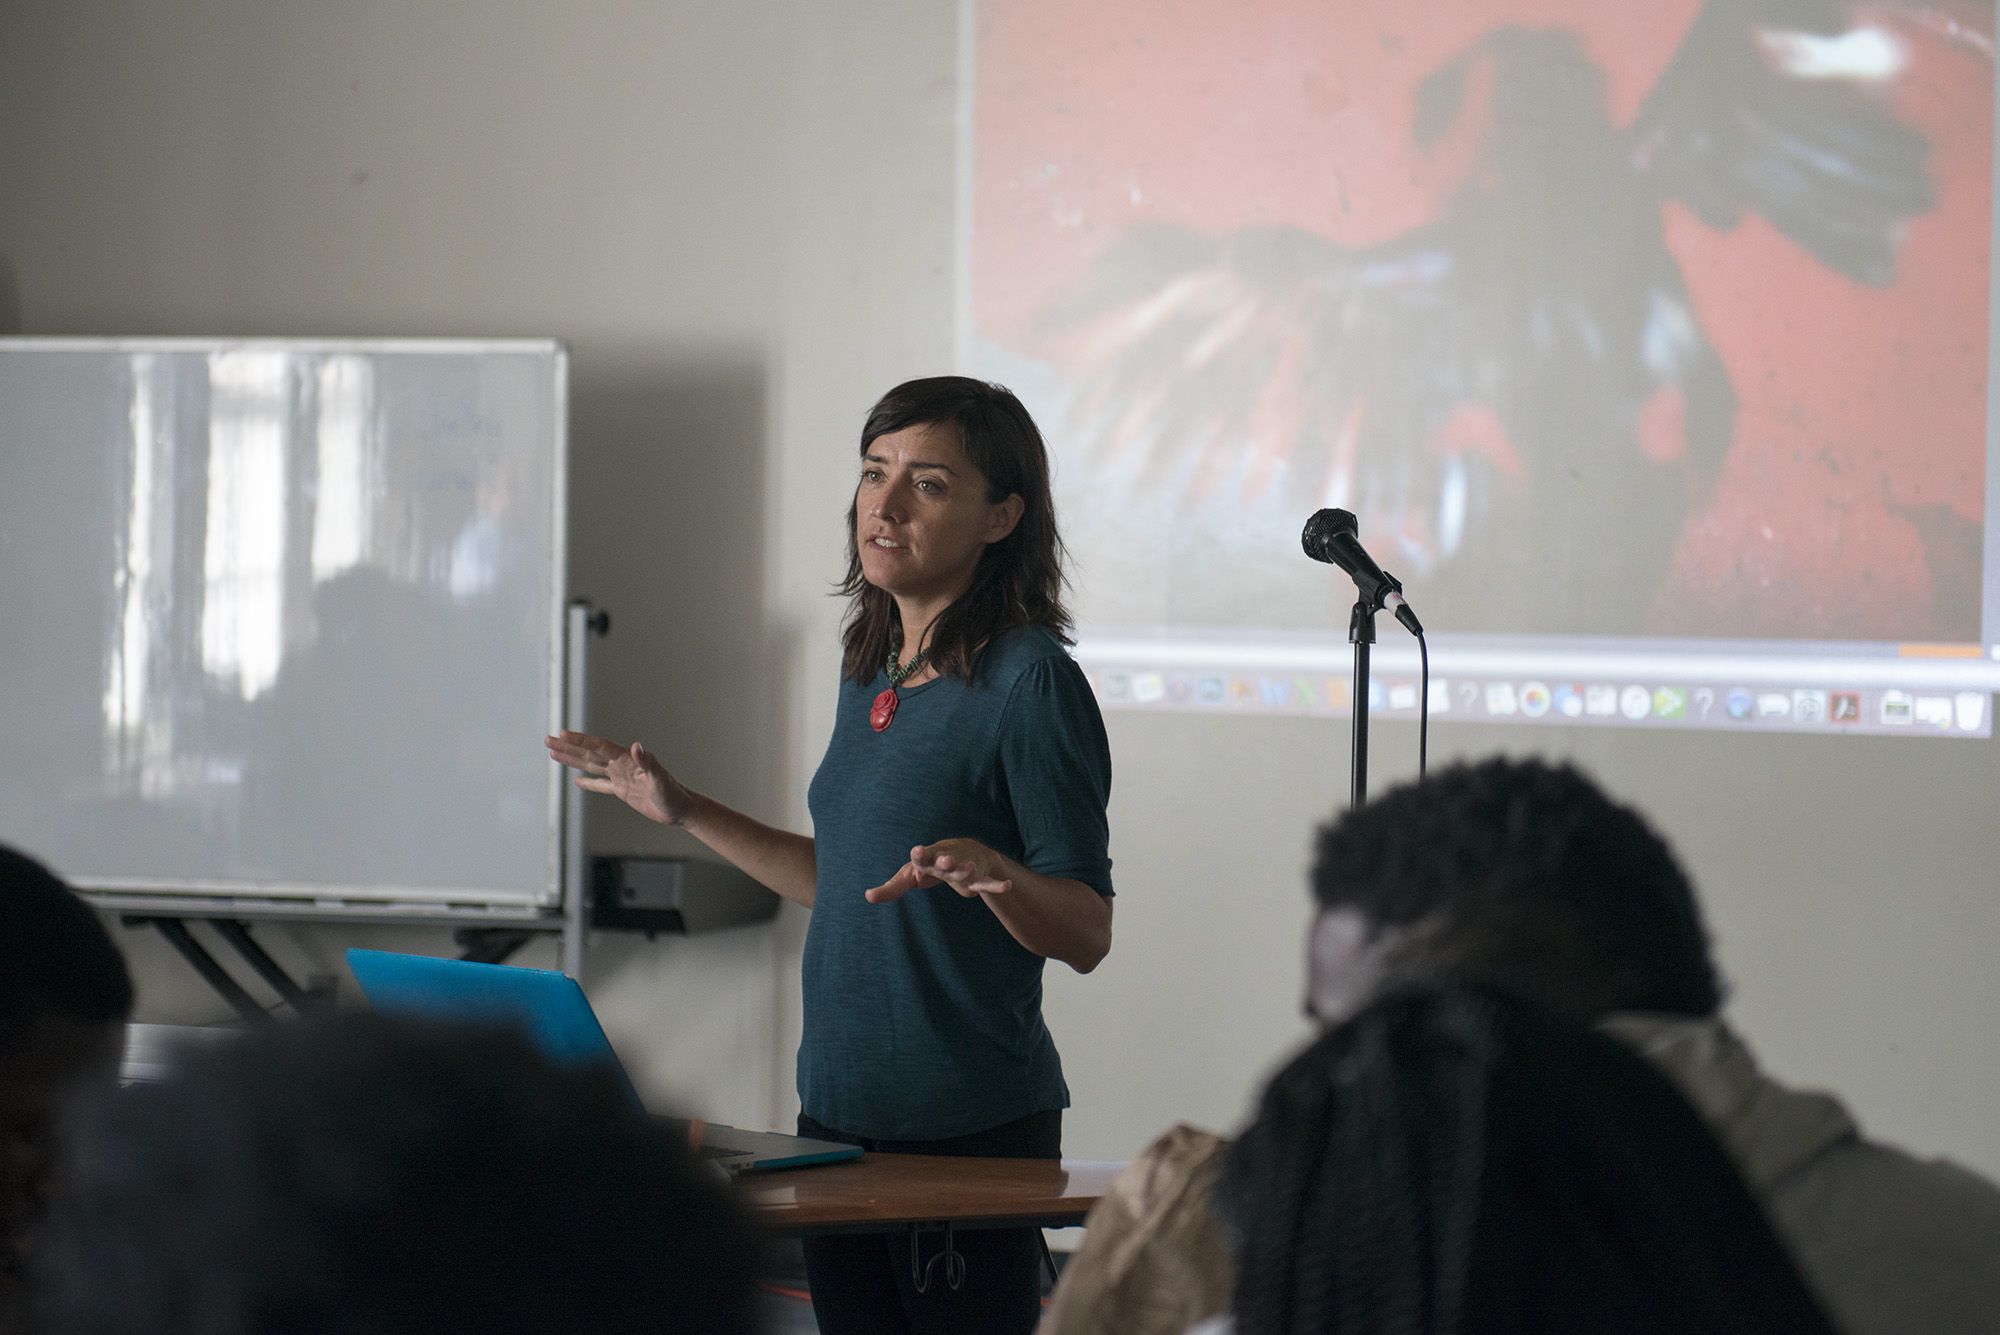 Pulitzer Center grantee Allison Shelley speaks to Soul of the City students on day two about photojournalism and her work in Haiti. Image by Jordan Roth. United States, 2016.